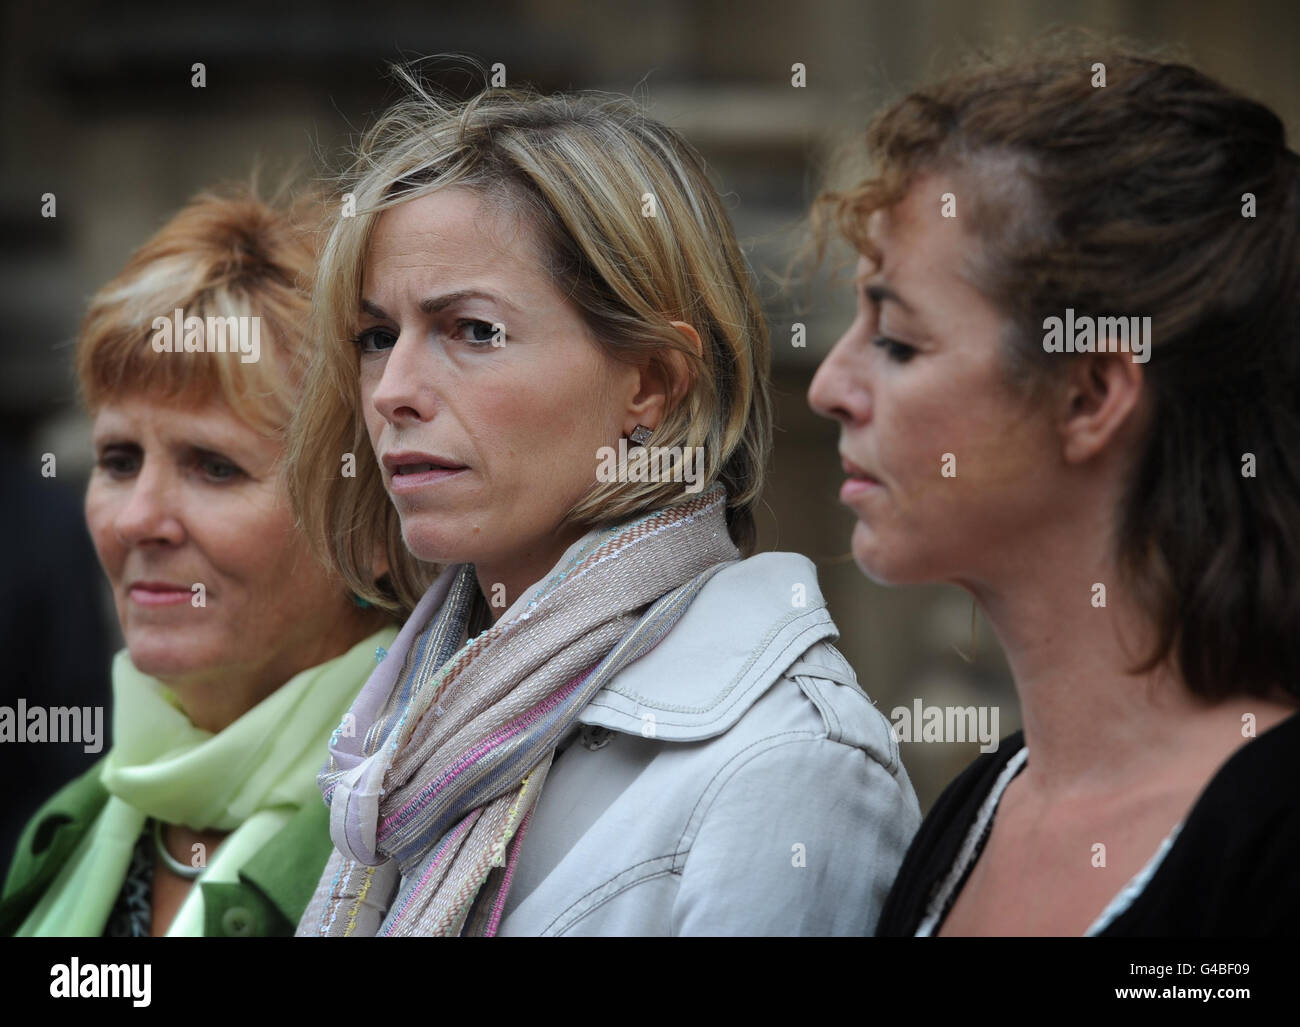 Kate McCann (centre), mother of Madeleine McCann who went missing in 2007 in Portugal arrives at a parliamentary inquiry into missing persons along with Nicki Durban (right) mother of missing Luke Durbin and Sarah Godwin (left) mother of missing Quentin Godwin, at the House of Commons in London. Stock Photo